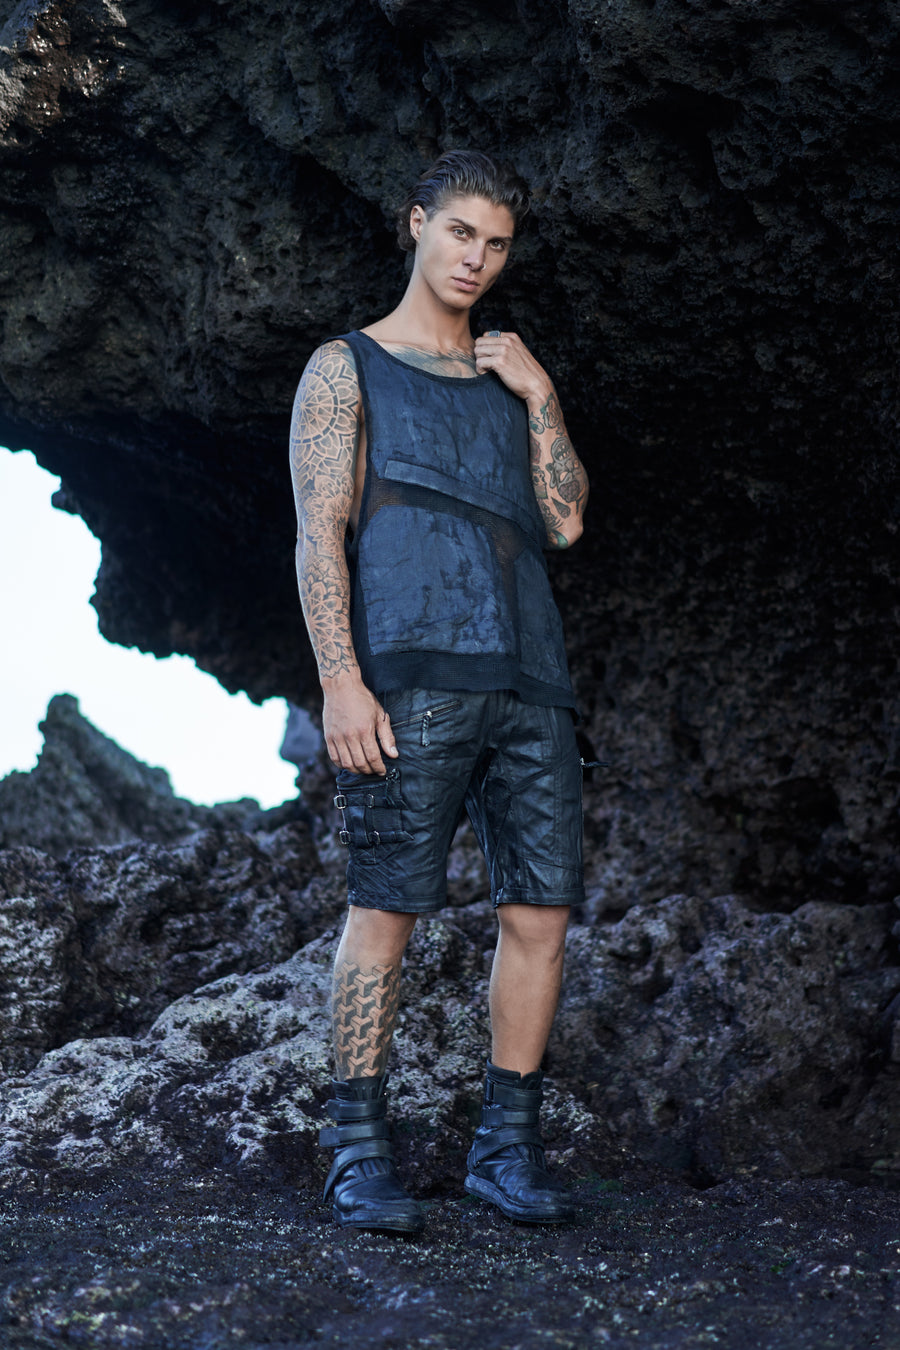 Men-Apparel-Clothing-Tank-Top-Sleeveless-Bottoms-Utility-Shorts-Leather-Boots